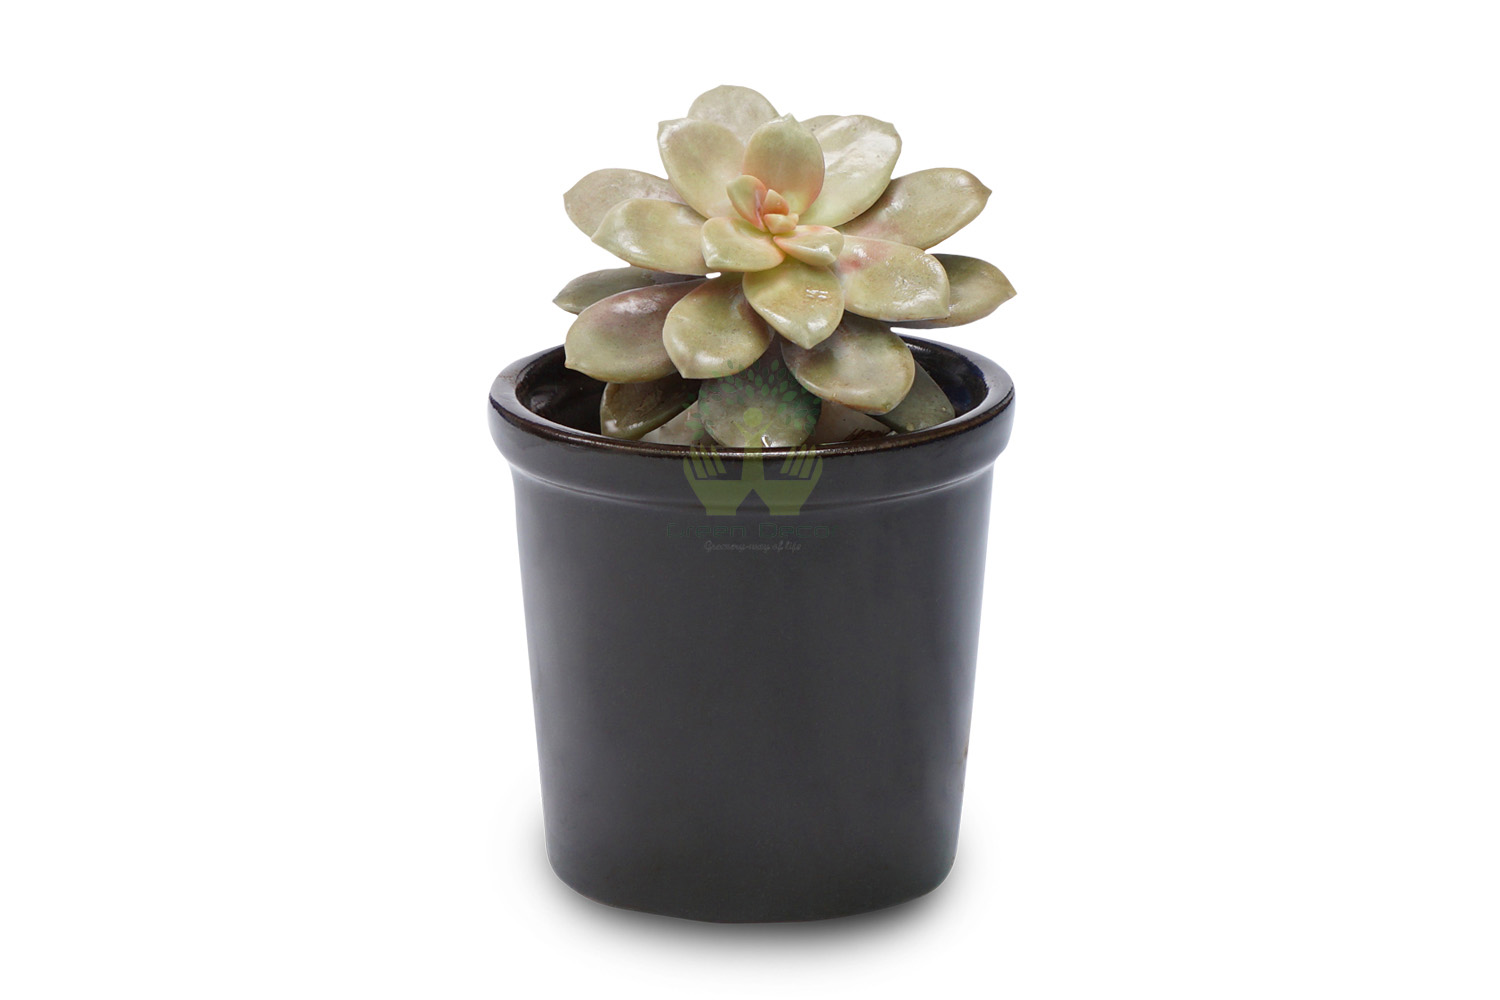 Buy Graptoveria Opalina Plants , White Pots and seeds in Delhi NCR by the best online nursery shop Greendecor.